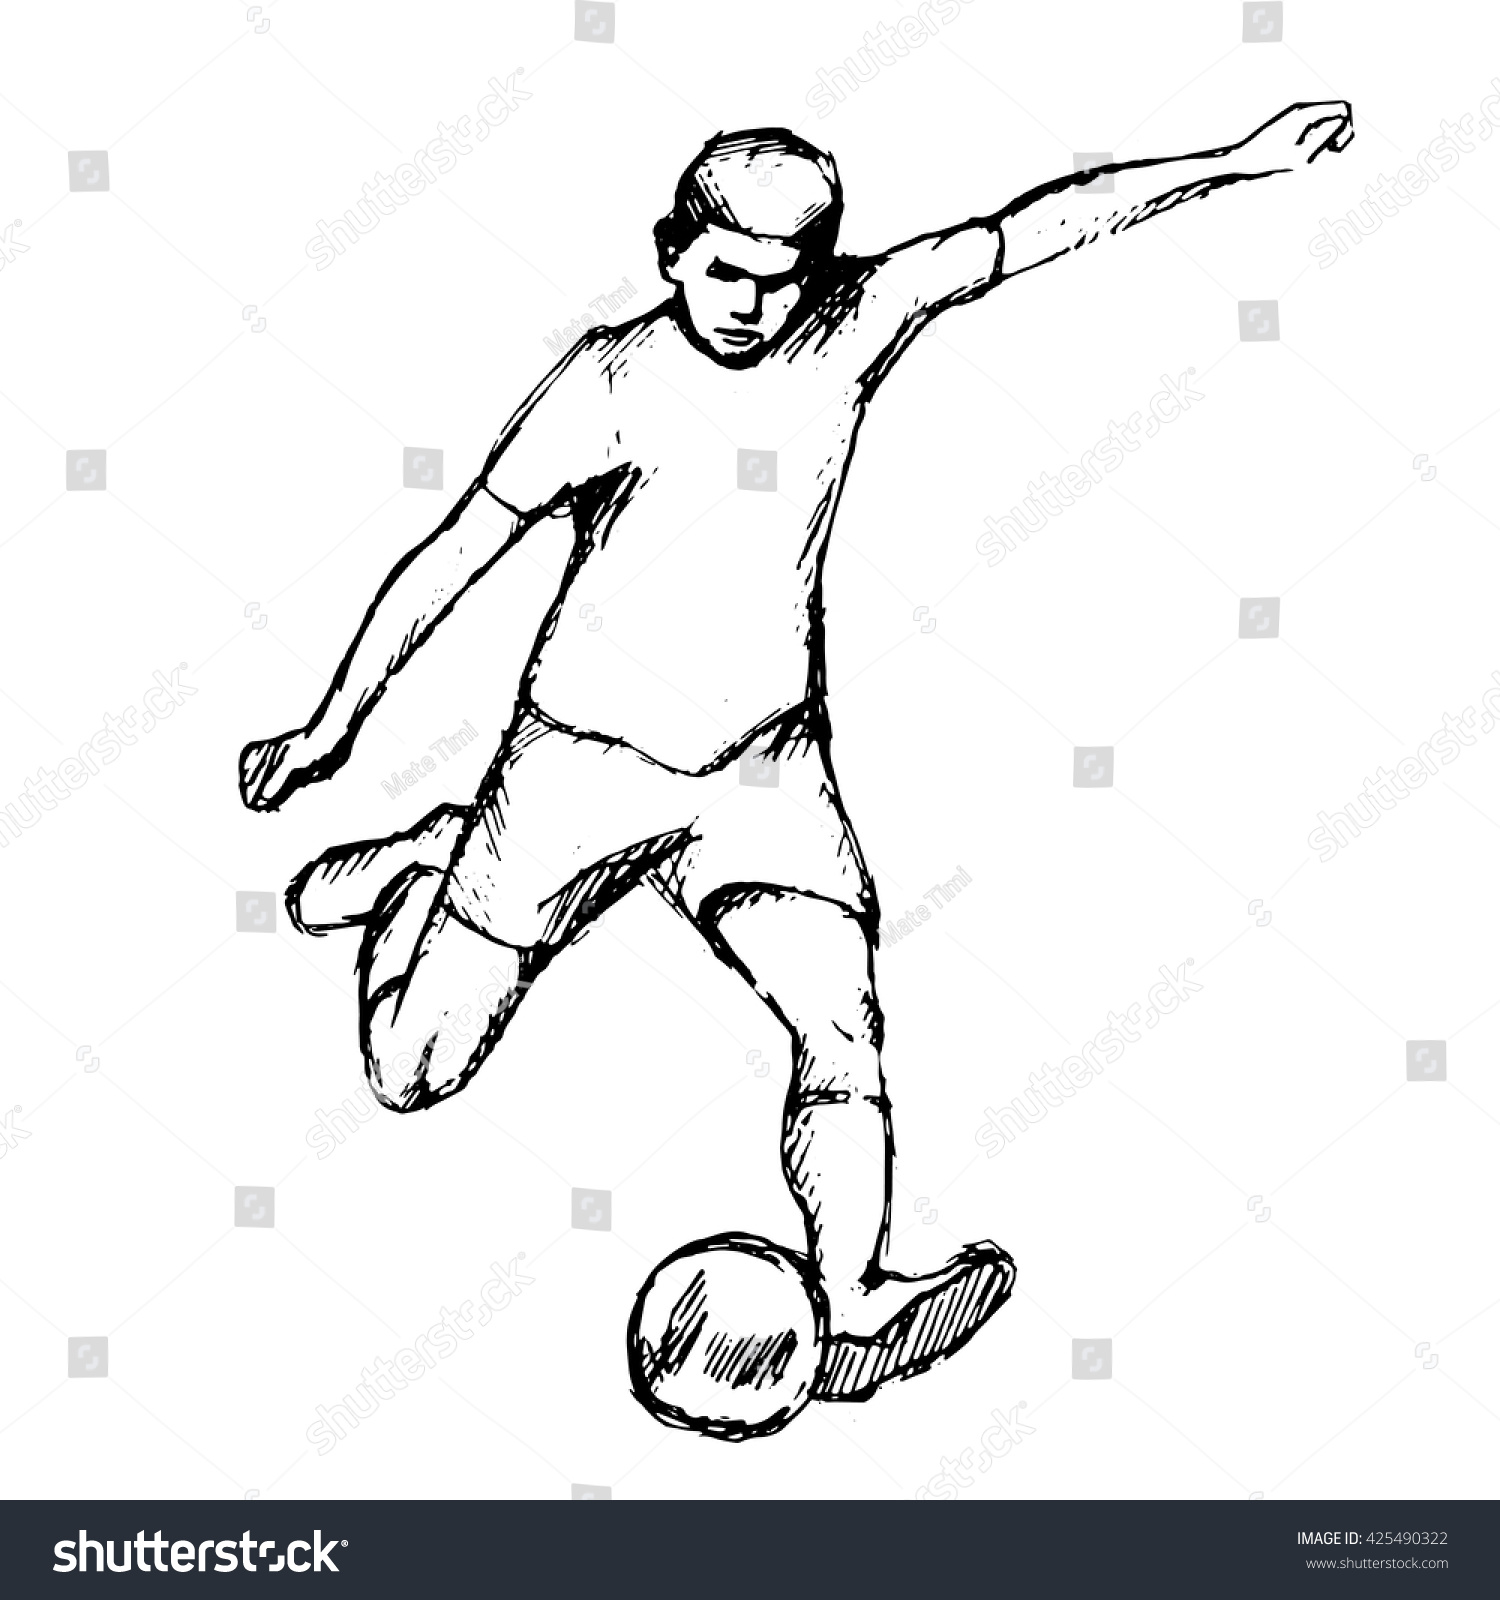 Soccer Player, Hand Made Drawing Over White Background Stock Vector ...